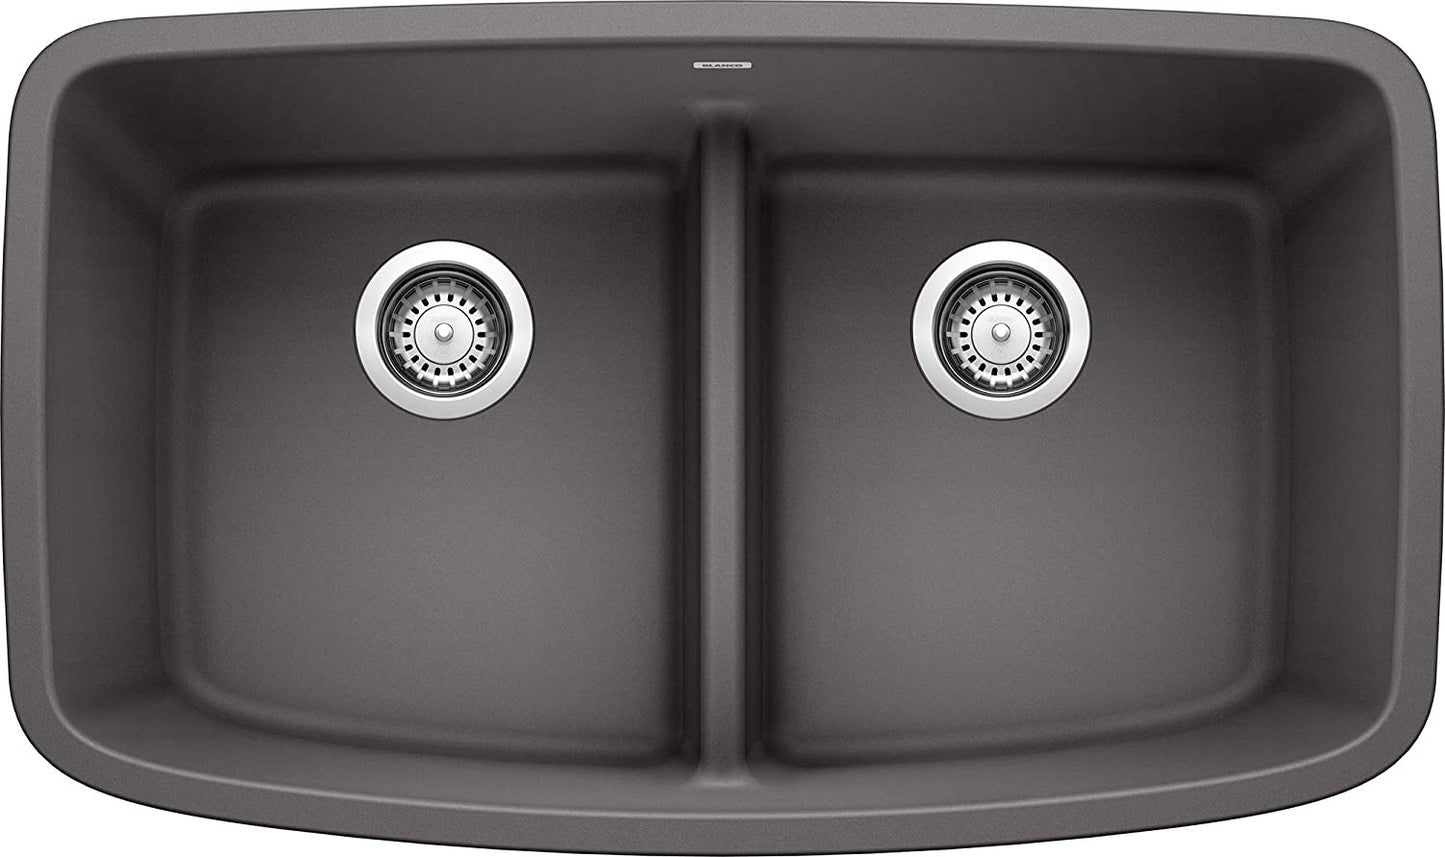 Valea Equal Double Bowl Undermount Kitchen Sink with Low Divide, 32" X 19" - Cinder